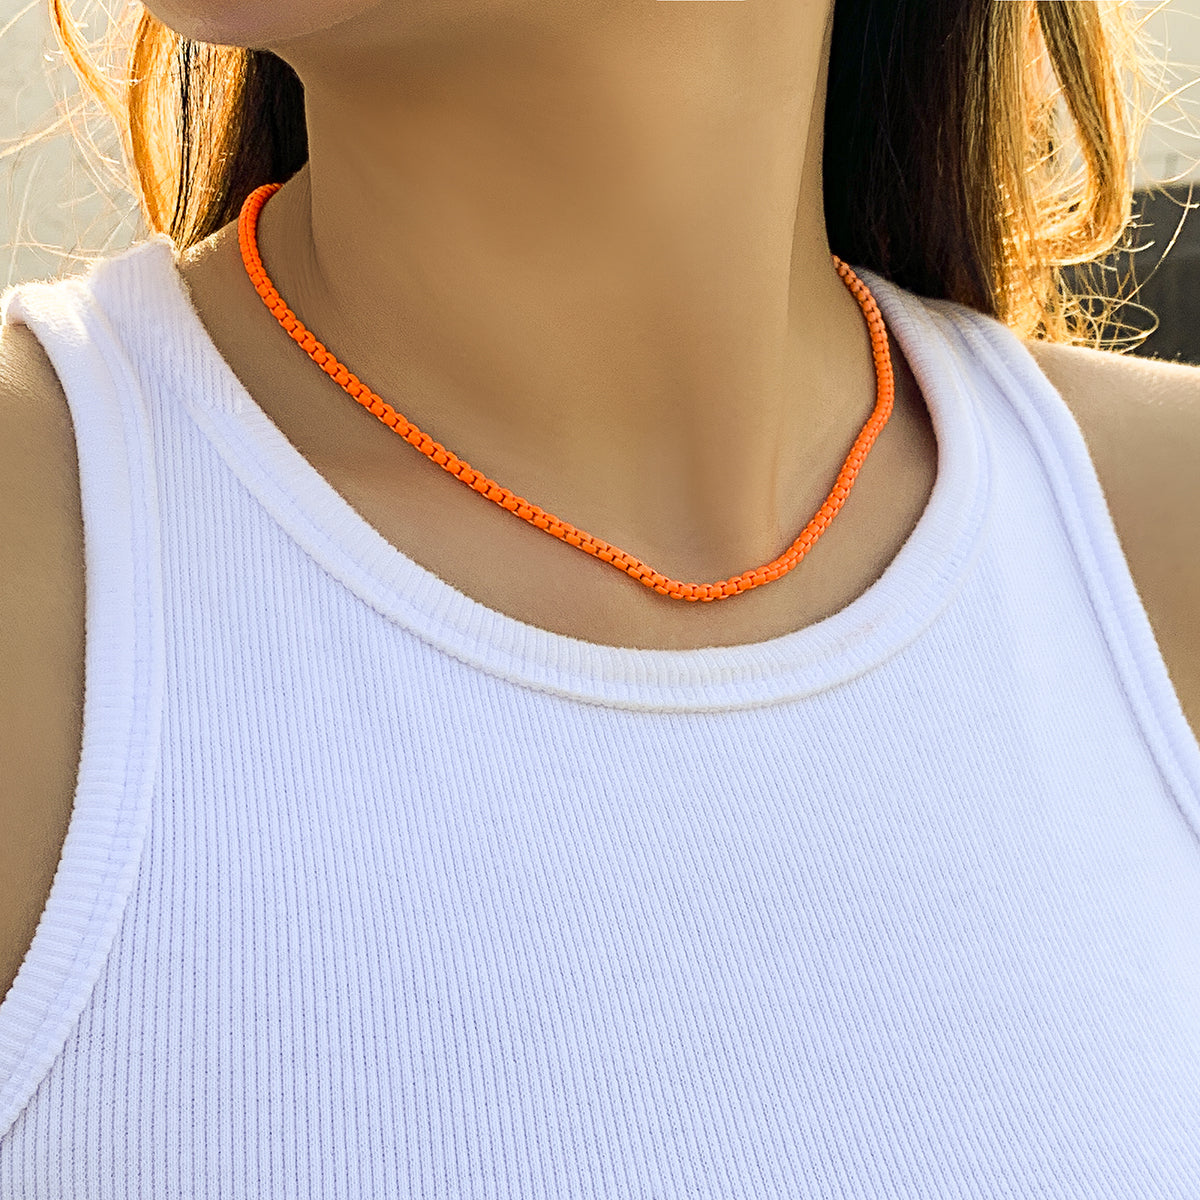 Orange Enamel & Silver-Plated Chain Necklace